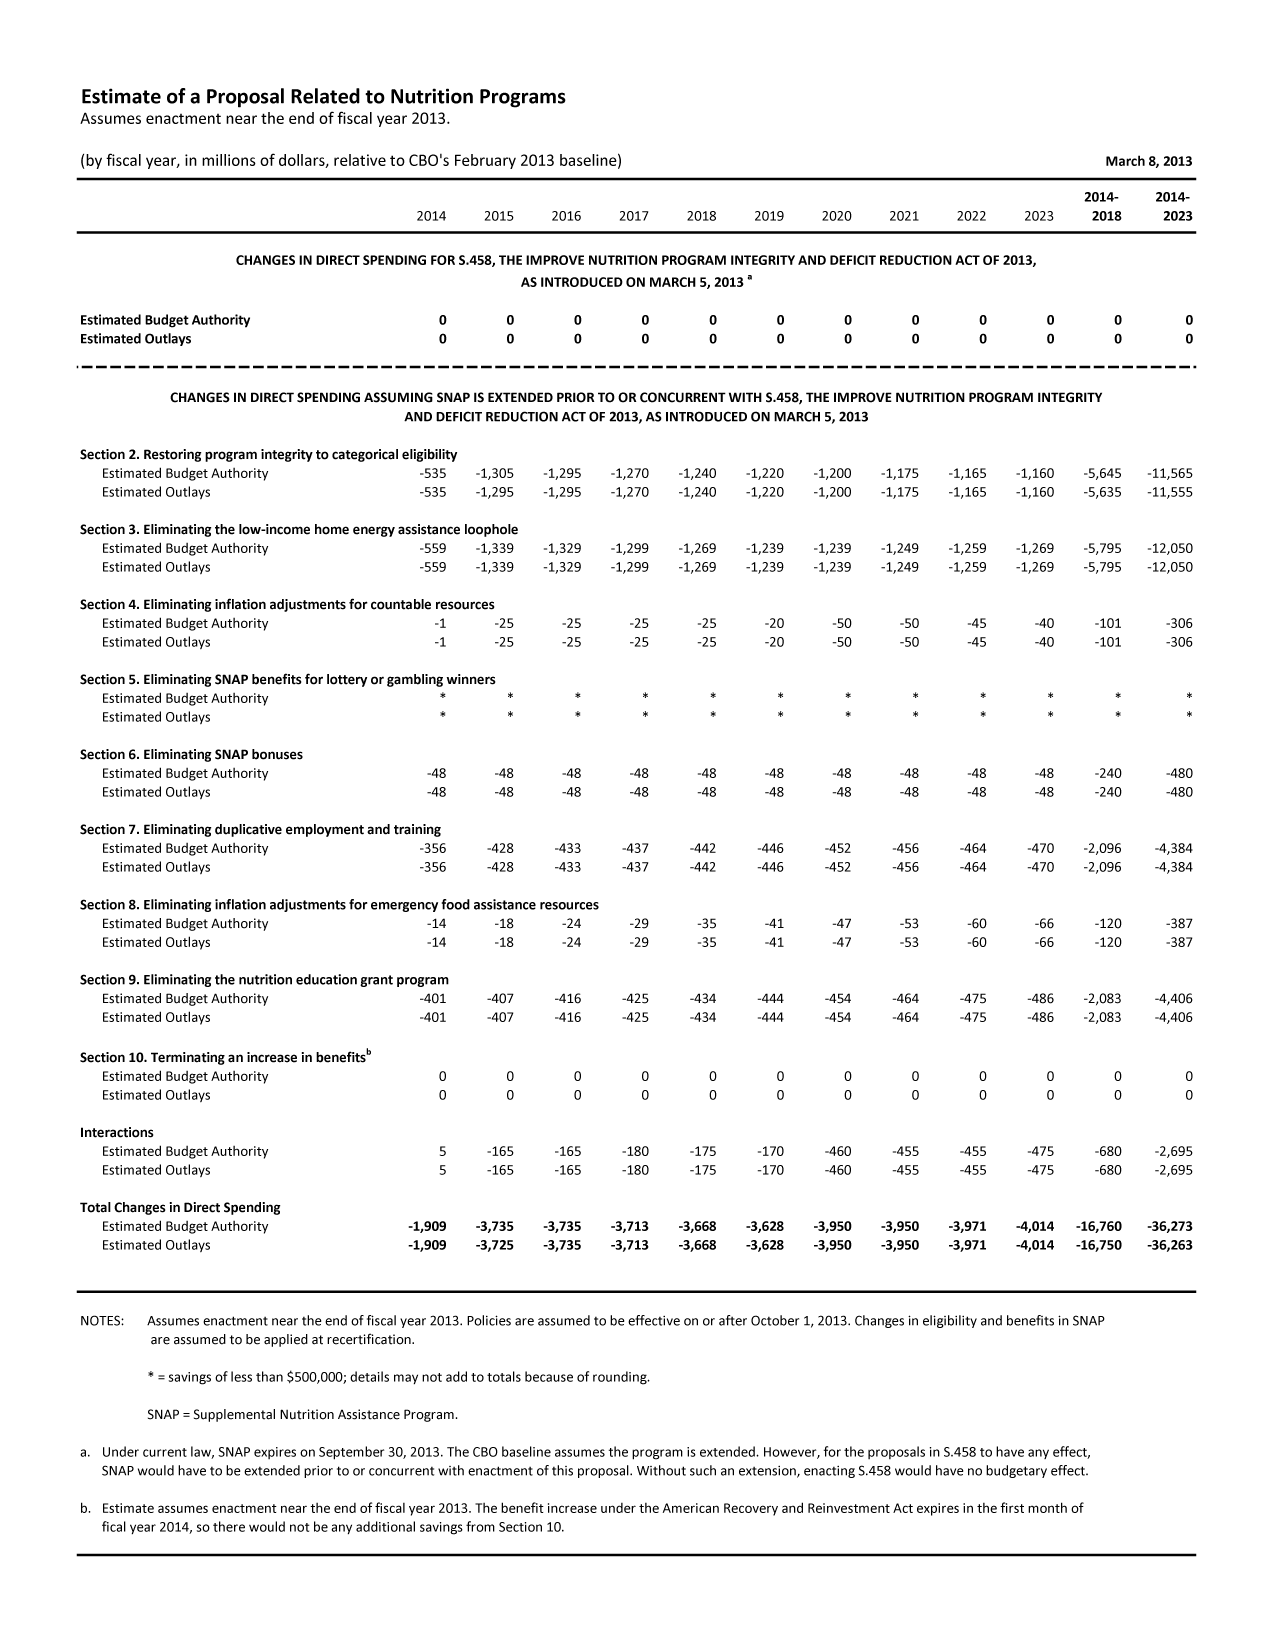 handle is hein.congrec/cbo10998 and id is 1 raw text is: Estimate of a Proposal Related to Nutrition Programs
Assumes enactment near the end of fiscal year 2013.
(by fiscal year, in millions of dollars, relative to CBO's February 2013 baseline)

2014-     2014-
2014      2015     2016     2017      2018     2019      2020     2021      2022     2023      2018      2023

CHANGES IN DIRECT SPENDING FOR 5.458, THE IMPROVE NUTRITION PROGRAM INTEGRITY AND DEFICIT REDUCTION ACT OF 2013,
AS INTRODUCED ON MARCH 5, 2013 a

Estimated Budget Authority
Estimated Outlays

0        0         0        0        0         0        0
0        0         0        0        0         0        0

0        0        0        0         0
0        0        0        0         0

CHANGES IN DIRECT SPENDING ASSUMING SNAP IS EXTENDED PRIOR TO OR CONCURRENT WITH S.458, THE IMPROVE NUTRITION PROGRAM INTEGRITY
AND DEFICIT REDUCTION ACT OF 2013, AS INTRODUCED ON MARCH 5, 2013
Section 2. Restoring program integrity to categorical eligibility
Estimated Budget Authority                 -535    -1,305    -1,295   -1,270   -1,240    -1,220   -1,200   -1,175    -1,165   -1,160   -5,645   -11,565
Estimated Outlays                          -535    -1,295    -1,295   -1,270   -1,240    -1,220   -1,200   -1,175    -1,165   -1,160   -5,635   -11,555
Section 3. Eliminating the low-income home energy assistance loophole
Estimated Budget Authority                 -559    -1,339    -1,329   -1,299   -1,269    -1,239   -1,239   -1,249    -1,259   -1,269   -5,795   -12,050
Estimated Outlays                          -559    -1,339    -1,329   -1,299   -1,269    -1,239   -1,239   -1,249    -1,259   -1,269   -5,795   -12,050

Section 4. Eliminating inflation adjustments for countable resources
Estimated Budget Authority                       -1       -25       -25       -25       -25
Estimated Outlays                                -1       -25       -25       -25       -25

-20       -50      -50       -45      -40      -101      -306
-20       -50      -50       -45      -40      -101      -306

Section 5. Eliminating SNAP benefits for lottery or gambling winners
Estimated Budget Authority
Estimated Outlays

Section 6. Eliminating SNAP bonuses
Estimated Budget Authority
Estimated Outlays

-48      -48      -48       -48      -48
-48      -48      -48       -48      -48

-48      -48       -48      -48      -48      -240      -480
-48      -48       -48      -48      -48      -240      -480

Section 7. Eliminating duplicative employment and training
Estimated Budget Authority                  -356      -428     -433      -437     -442      -446     -452      -456     -464      -470    -2,096    -4,384
Estimated Outlays                           -356      -428     -433      -437     -442      -446     -452      -456     -464      -470    -2,096    -4,384

Section 8. Eliminating inflation adjustments for emergency food assistance resources
Estimated Budget Authority                    -14       -18       -24      -29       -35
Estimated Outlays                             -14       -18       -24      -29       -35

-41       -47      -53       -60       -66      -120      -387
-41       -47      -53       -60       -66      -120      -387

Section 9. Eliminating the nutrition education grant program
Estimated Budget Authority                 -401     -407     -416     -425     -434     -444     -454      -464     -475     -486    -2,083   -4,406
Estimated Outlays                          -401     -407     -416     -425     -434     -444     -454      -464     -475     -486    -2,083   -4,406

Section 10. Terminating an increase in benefitsb
Estimated Budget Authority
Estimated Outlays
Interactions
Estimated Budget Authority
Estimated Outlays
Total Changes in Direct Spending
Estimated Budget Authority
Estimated Outlays

0        0        0        0        0        0        0        0        0        0        0         0
0        0        0        0        0        0        0        0        0        0        0         0
5     -165     -165     -180     -175     -170     -460     -455     -455     -475     -680    -2,695
5     -165     -165     -180     -175     -170     -460     -455     -455     -475     -680    -2,695
-1,909   -3,735   -3,735   -3,713   -3,668   -3,628   -3,950   -3,950   -3,971   -4,014  -16,760  -36,273
-1,909   -3,725   -3,735   -3,713   -3,668   -3,628   -3,950   -3,950   -3,971   -4,014  -16,750  -36,263

NOTES:   Assumes enactment near the end of fiscal year 2013. Policies are assumed to be effective on or after October 1, 2013. Changes in eligibility and benefits in SNAP
are assumed to be applied at recertification.
* = savings of less than $500,000; details may not add to totals because of rounding.
SNAP= Supplemental Nutrition Assistance Program.
a. Under current law, SNAP expires on September 30, 2013. The CBO baseline assumes the program is extended. However, for the proposals in S.458 to have any effect,
SNAP would have to be extended prior to or concurrent with enactment of this proposal. Without such an extension, enacting S.458 would have no budgetary effect.
b. Estimate assumes enactment near the end of fiscal year 2013. The benefit increase under the American Recovery and Reinvestment Act expires in the first month of
fical year 2014, so there would not be any additional savings from Section 10.

March 8, 2013


